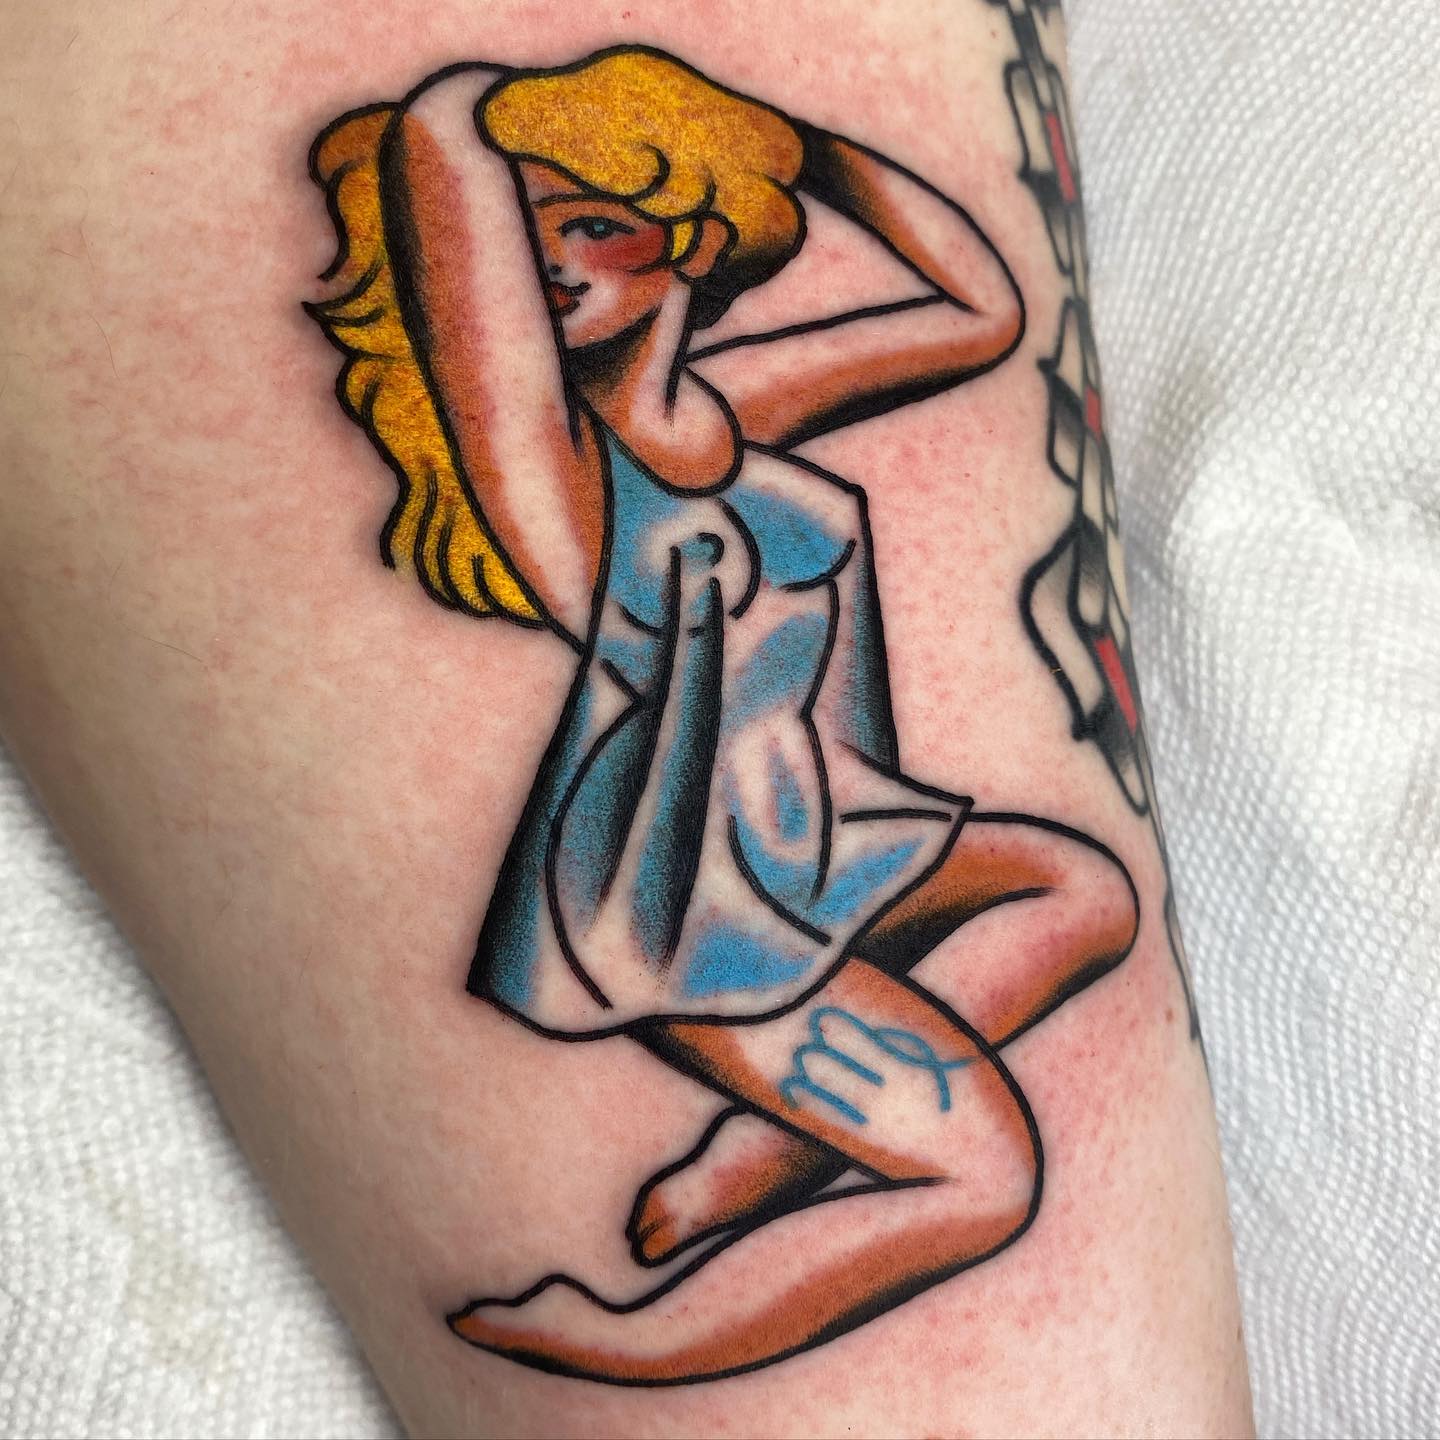 When you cartoonize something, it gets a cuter and nicer look. Plus, having a tattoo that has a cartoon zodiac sign  can be an interesting idea.